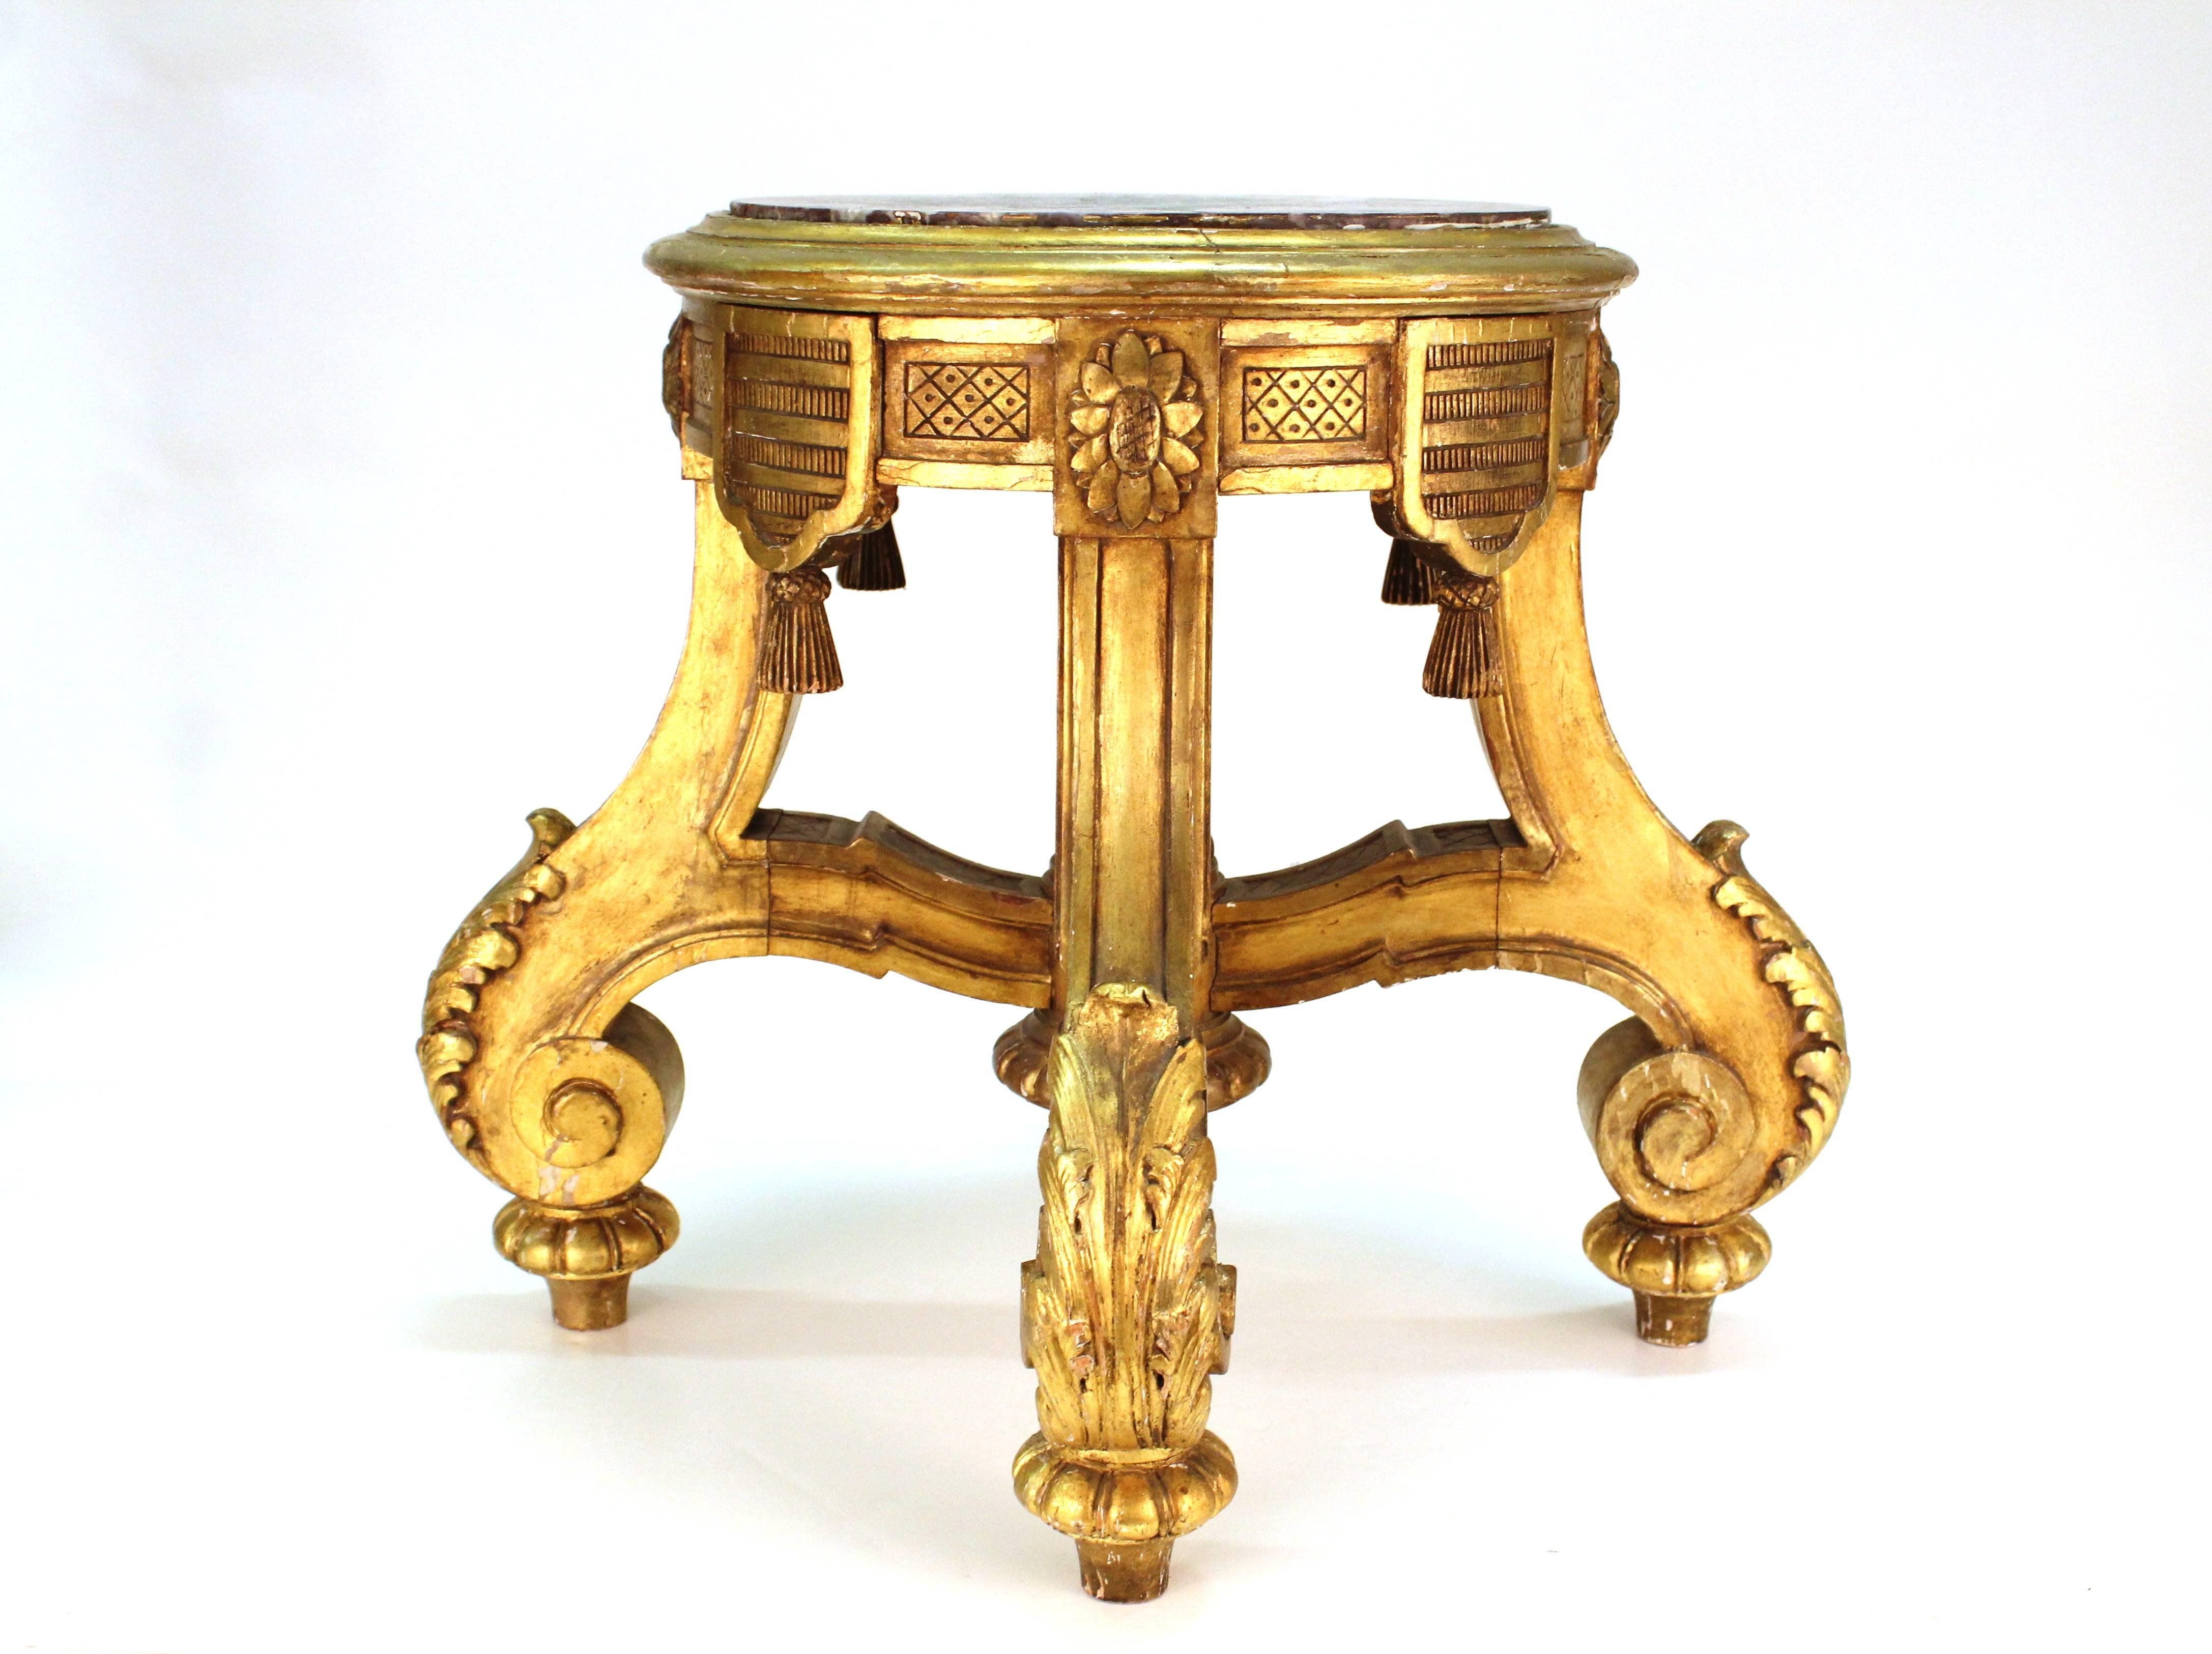 A pedestal or stool in giltwood with a marble top. Stands on four scrolled feet accented with acanthus leaves. The circular top is framed in rosettes and carved tassels. The item is in good condition with minor wear appropriate to age and use.